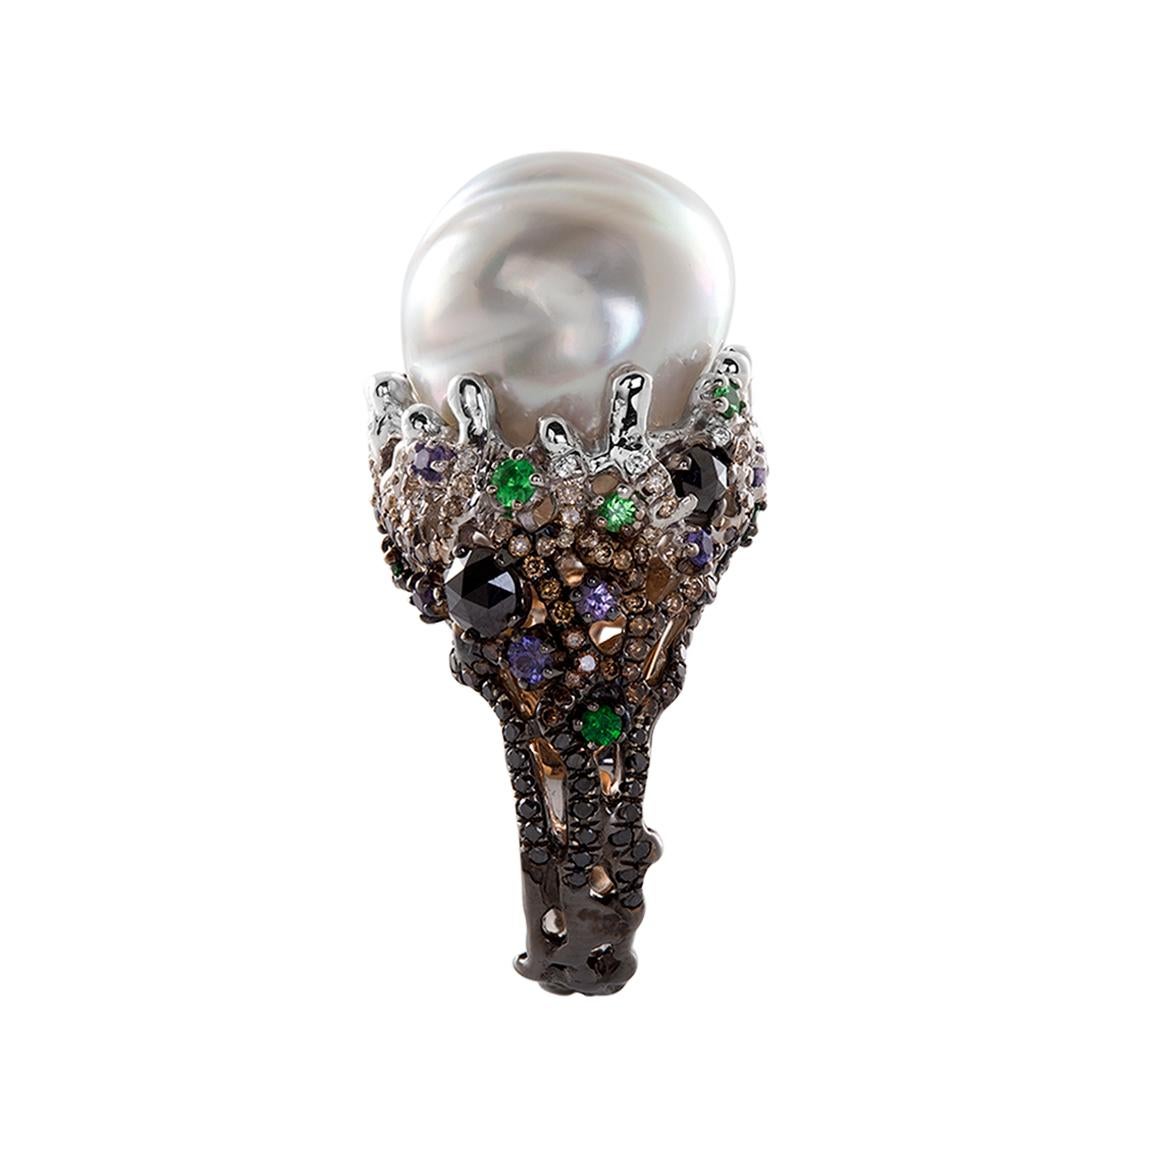 White Gold (with black rhodium) and Rose Gold, White/Brown/Black Diamonds 2.63 cts, Purple Sapphires 0.54 cts, Tsavorites 0.39 cts, Large Baroque Pearl 16 mm. 

Gorgonia Ring, is a tribute to the Barrier Reef where colour gemstones are encrusted in